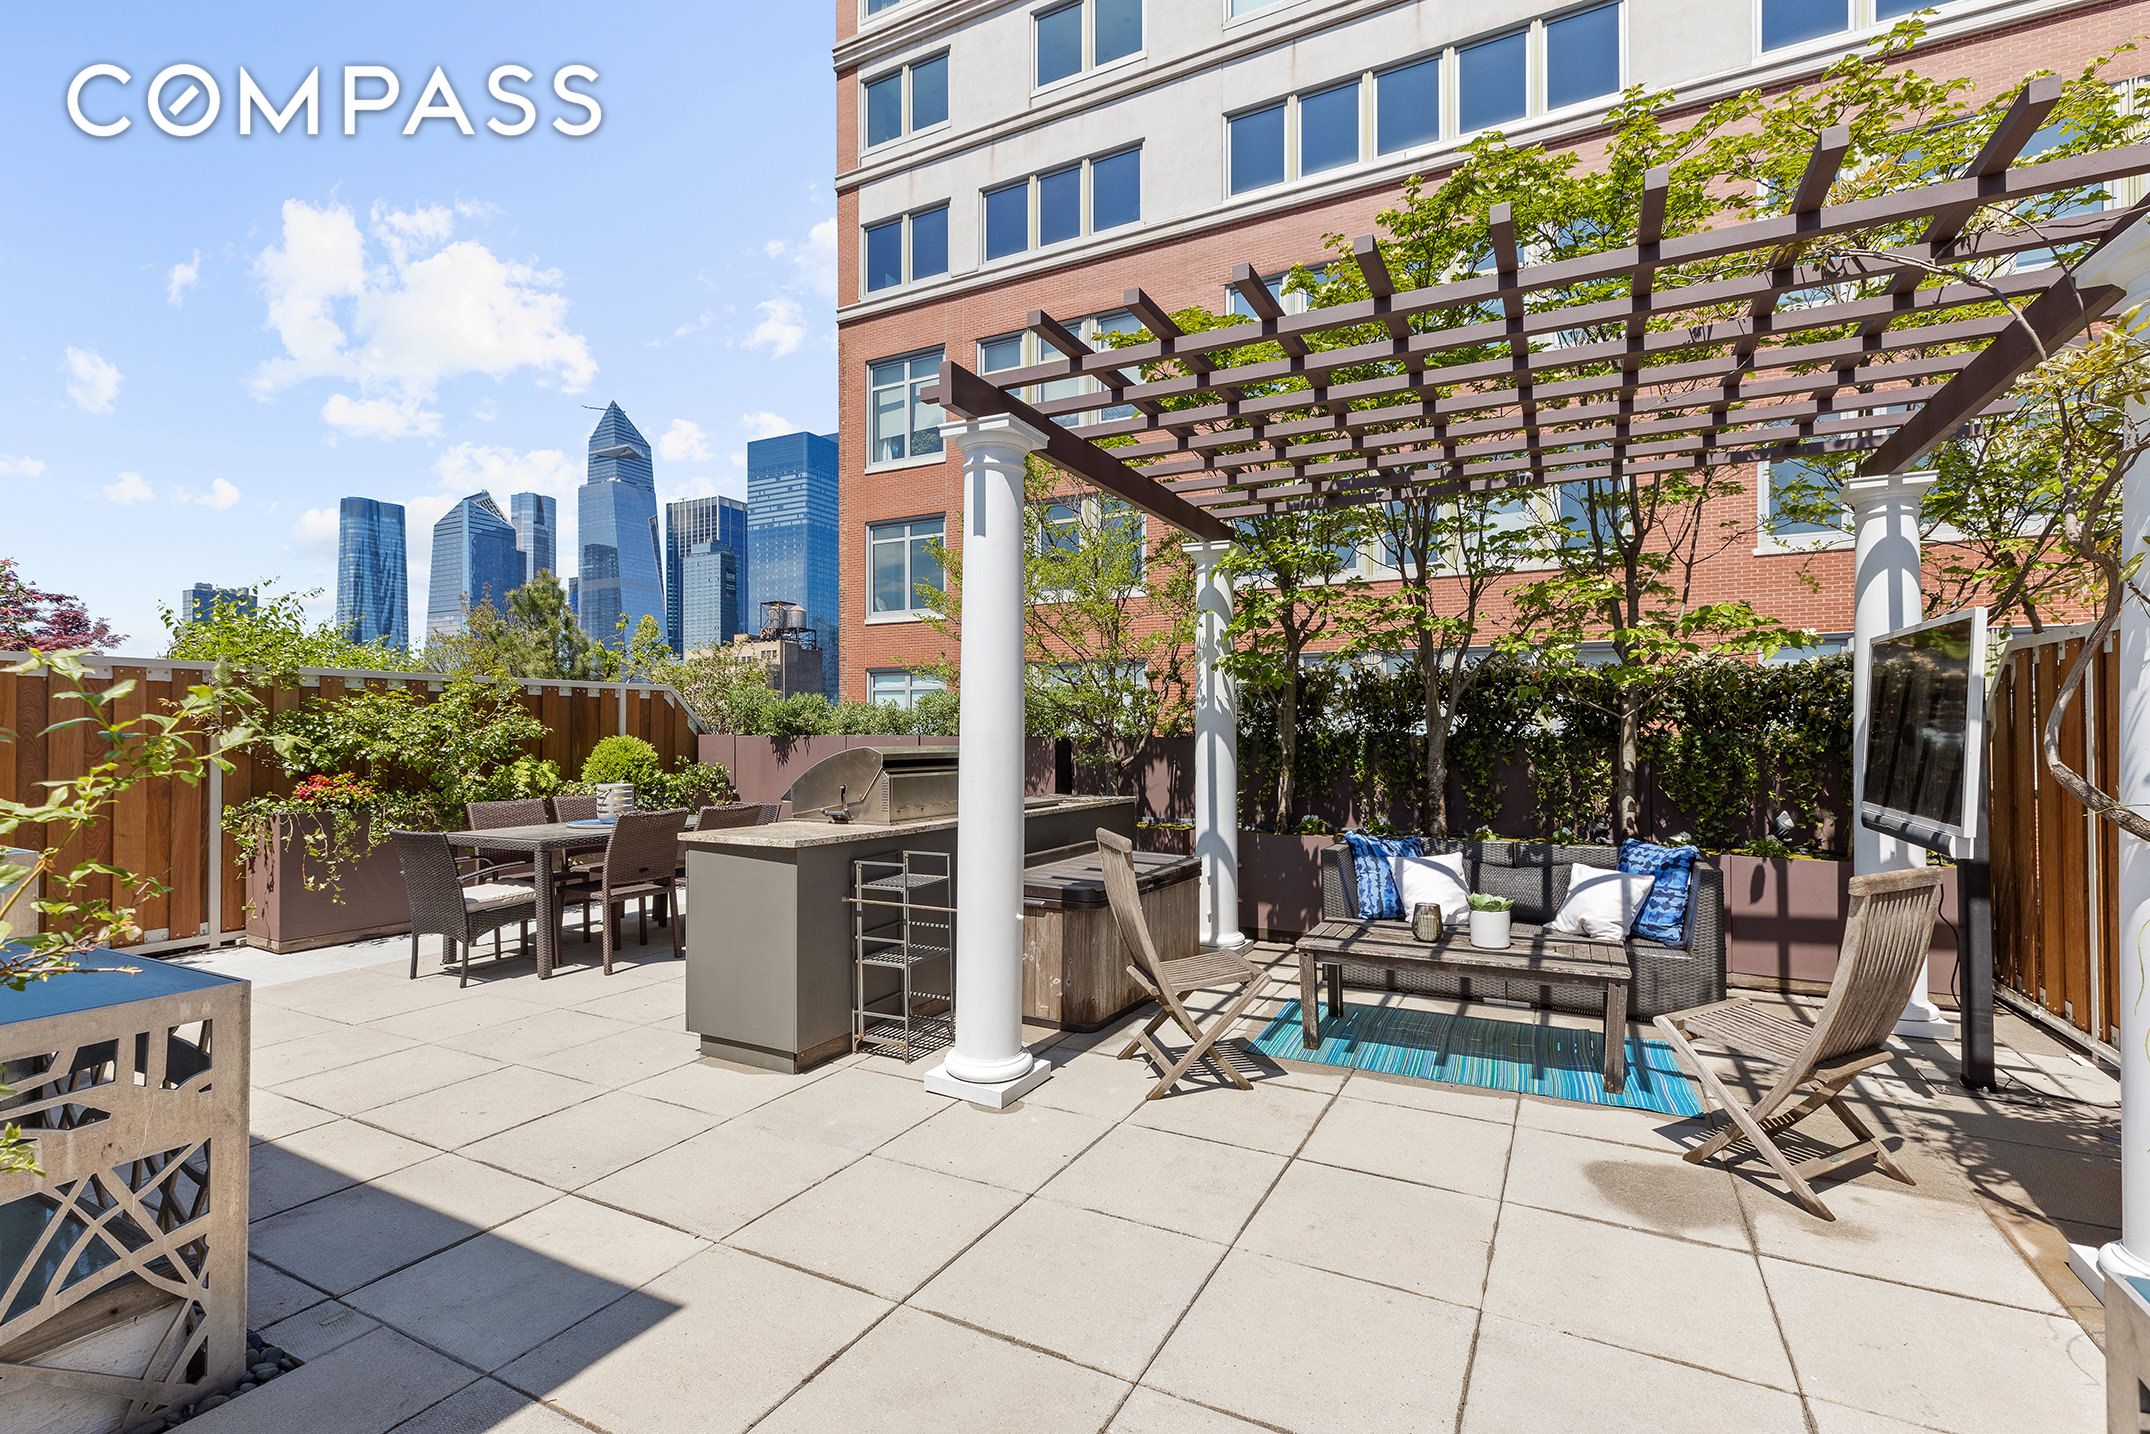 252 7th Avenue Phy, Chelsea, Downtown, NYC - 2 Bedrooms  
3.5 Bathrooms  
4 Rooms - 